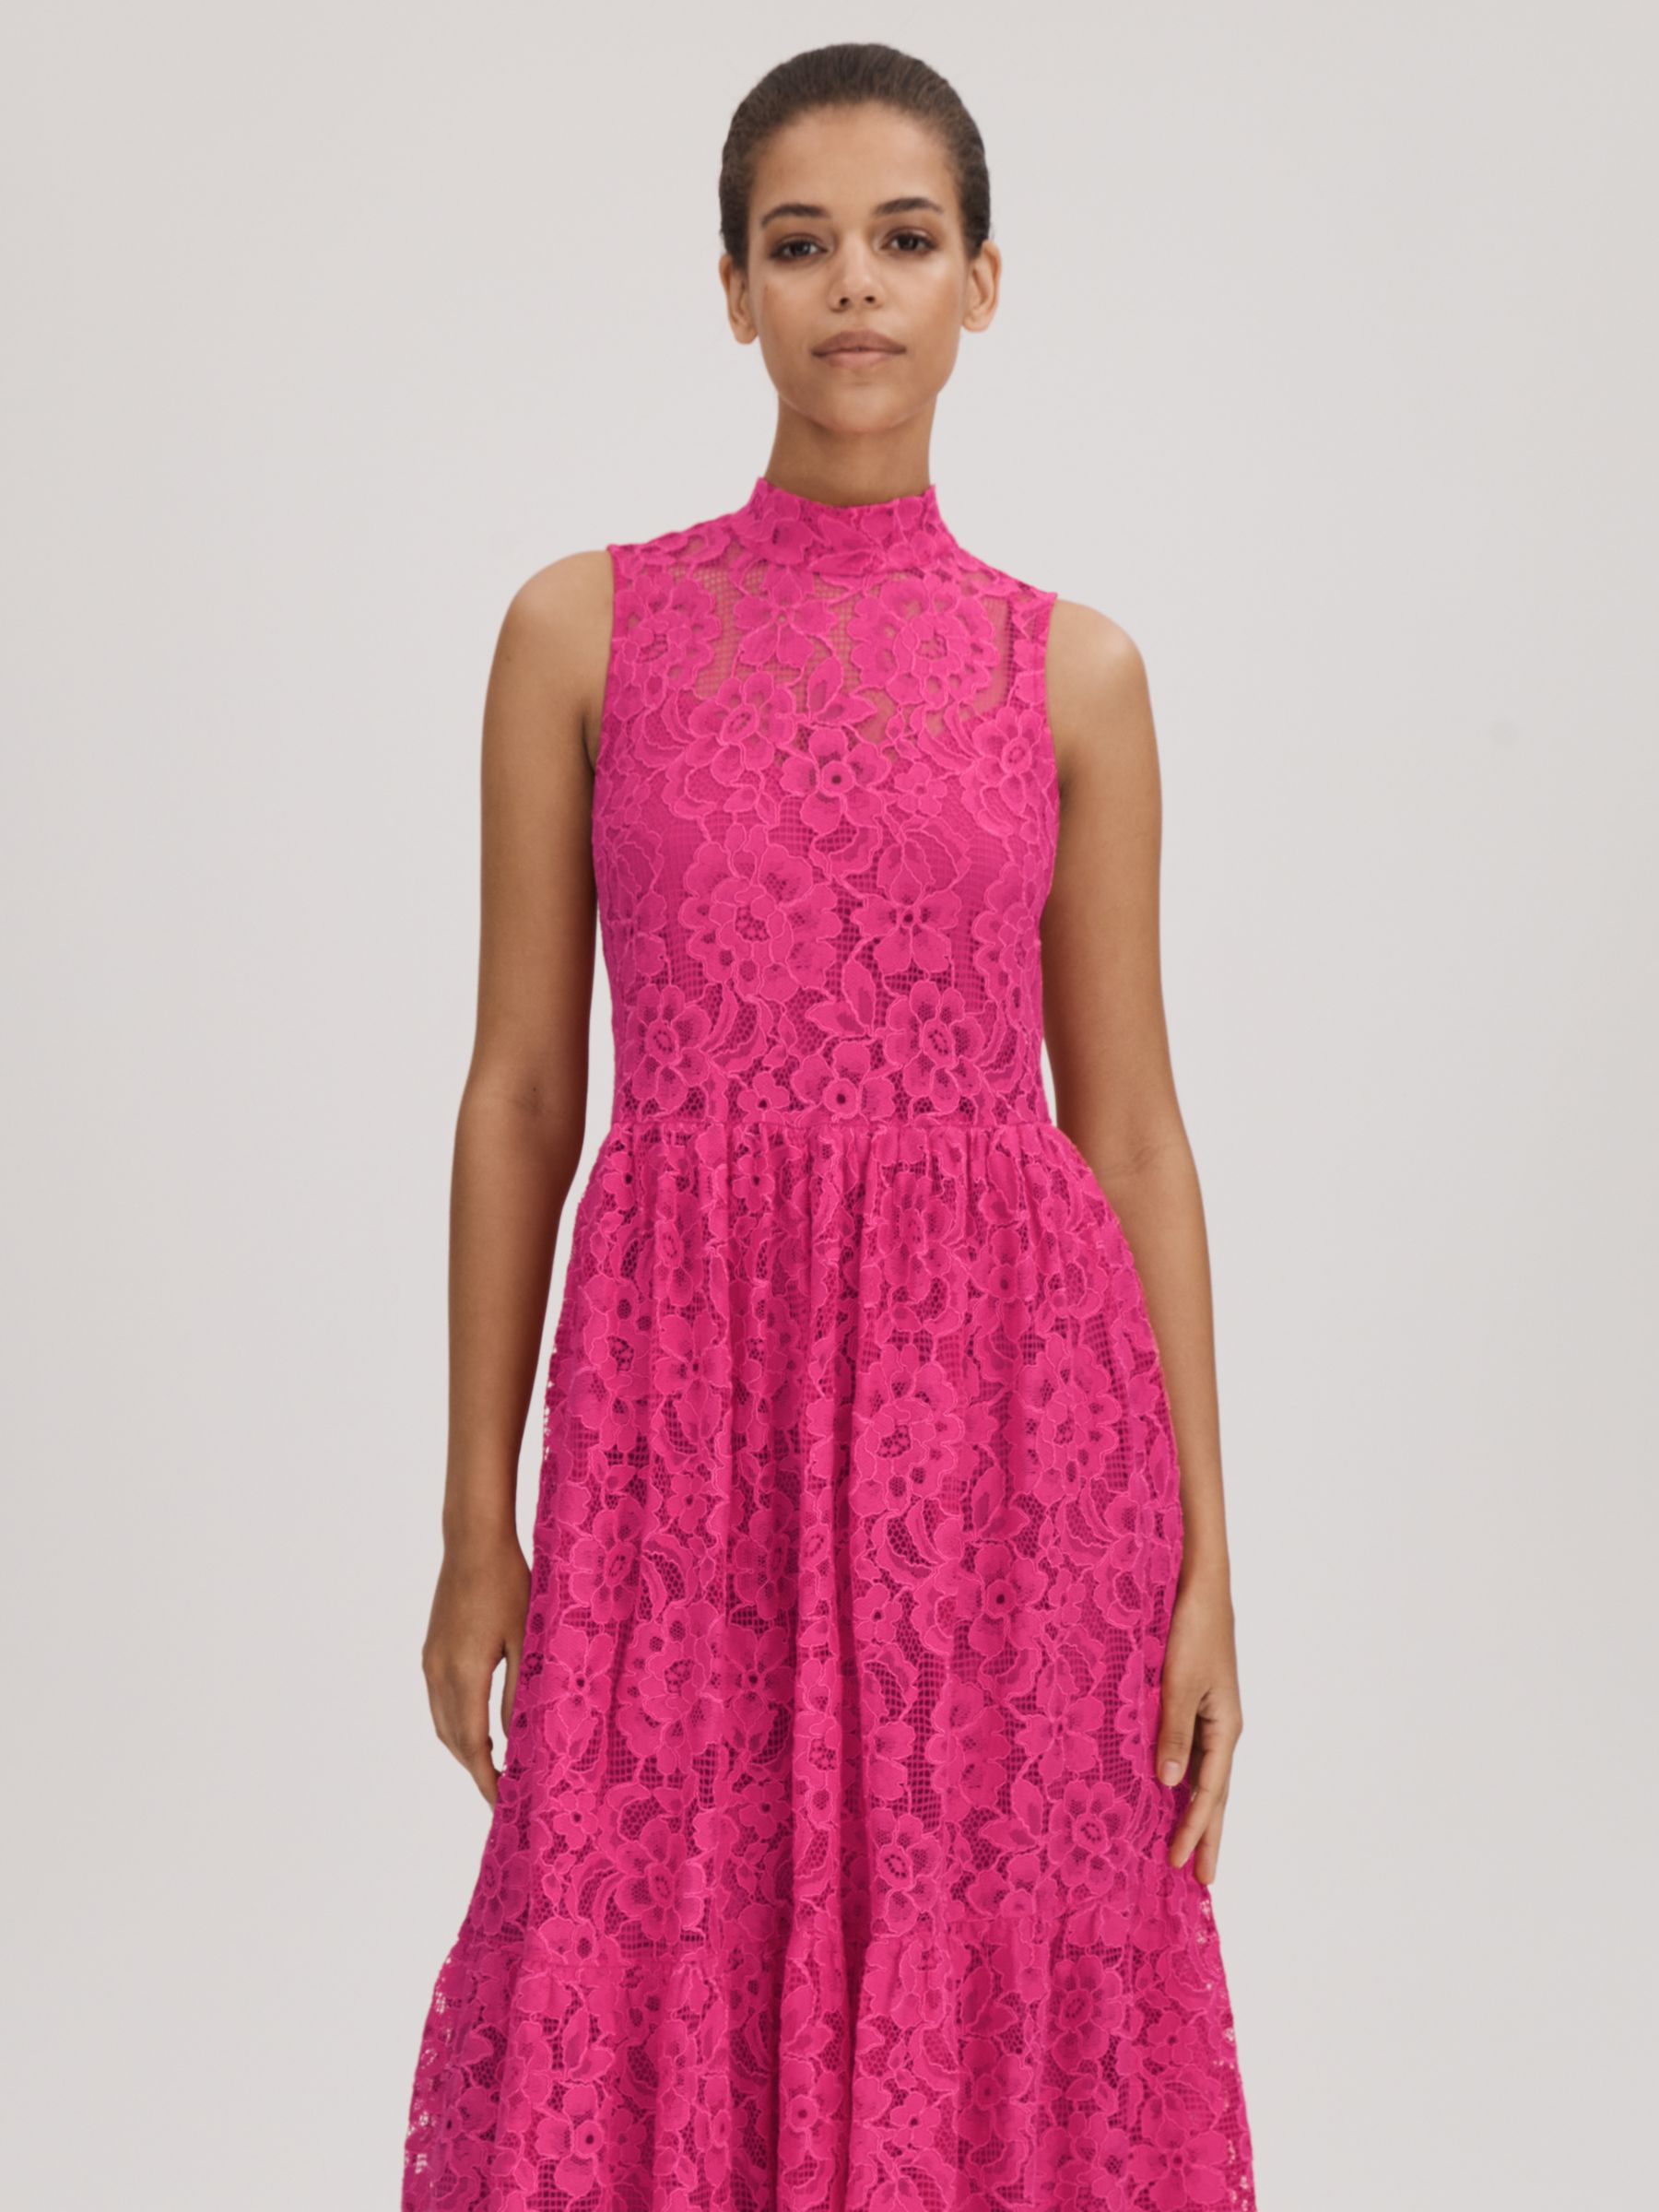 Buy FLORERE High Neck Floral Lace Midi Dress, Bright Pink Online at johnlewis.com